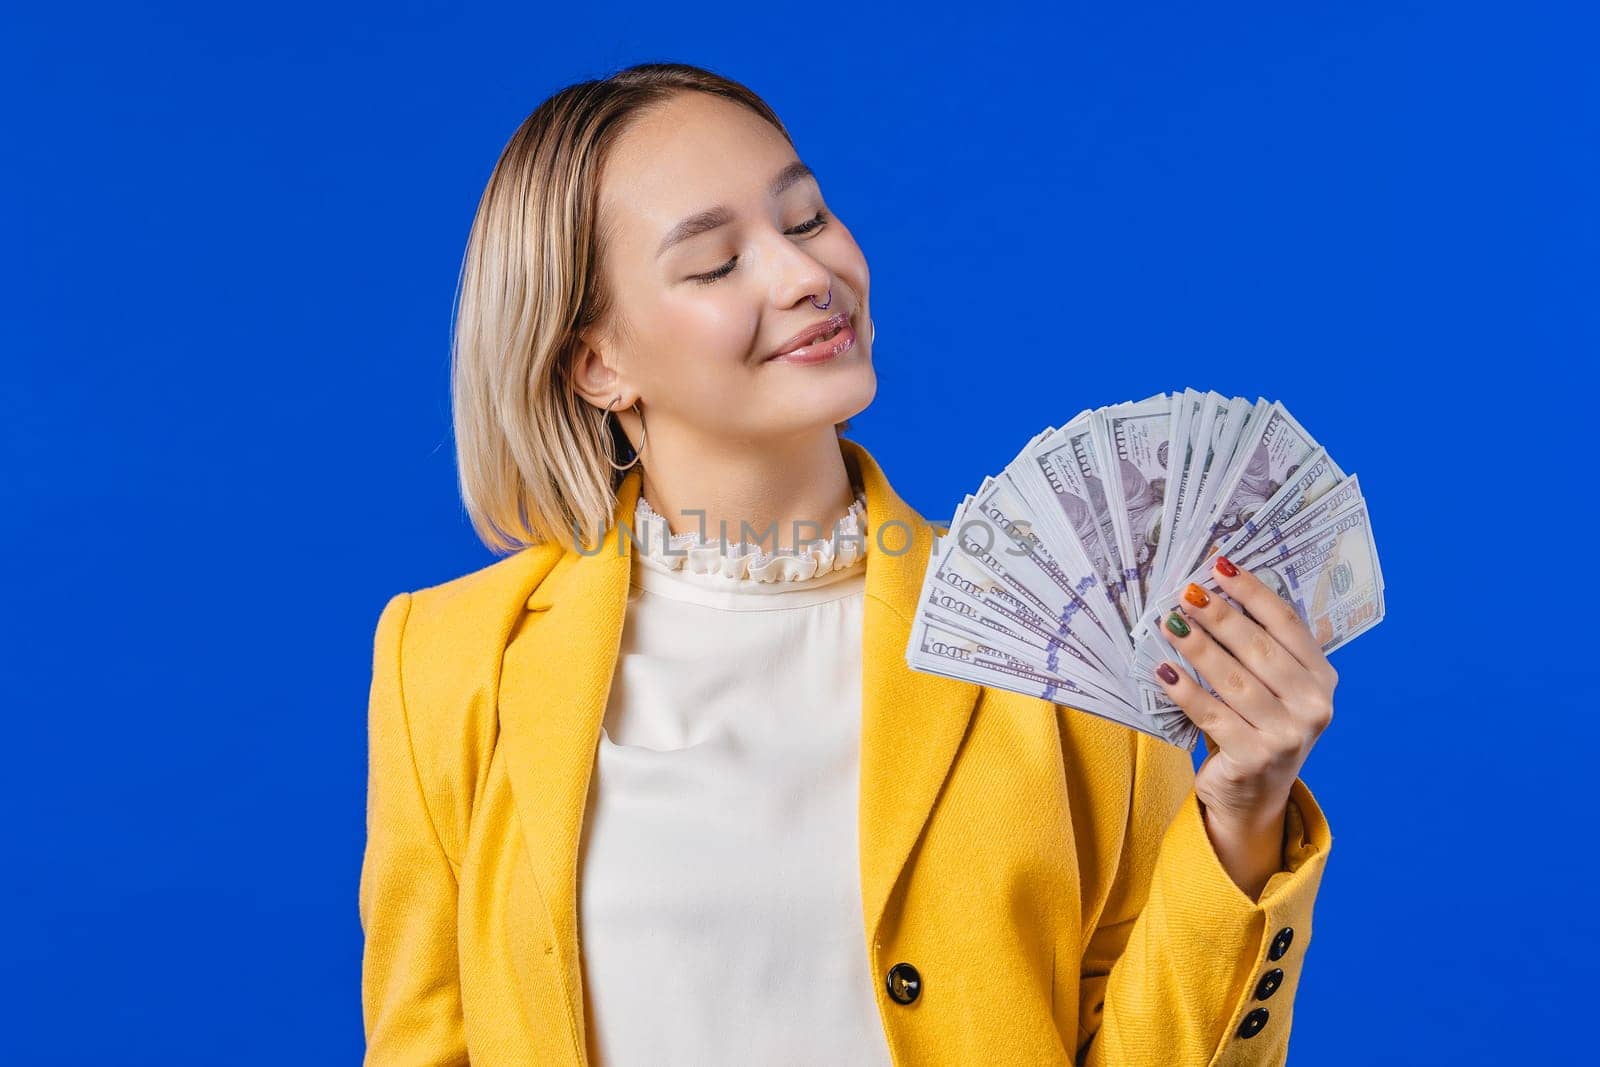 Rich excited blonde woman with cash money USD currency dollars banknotes on blue by kristina_kokhanova